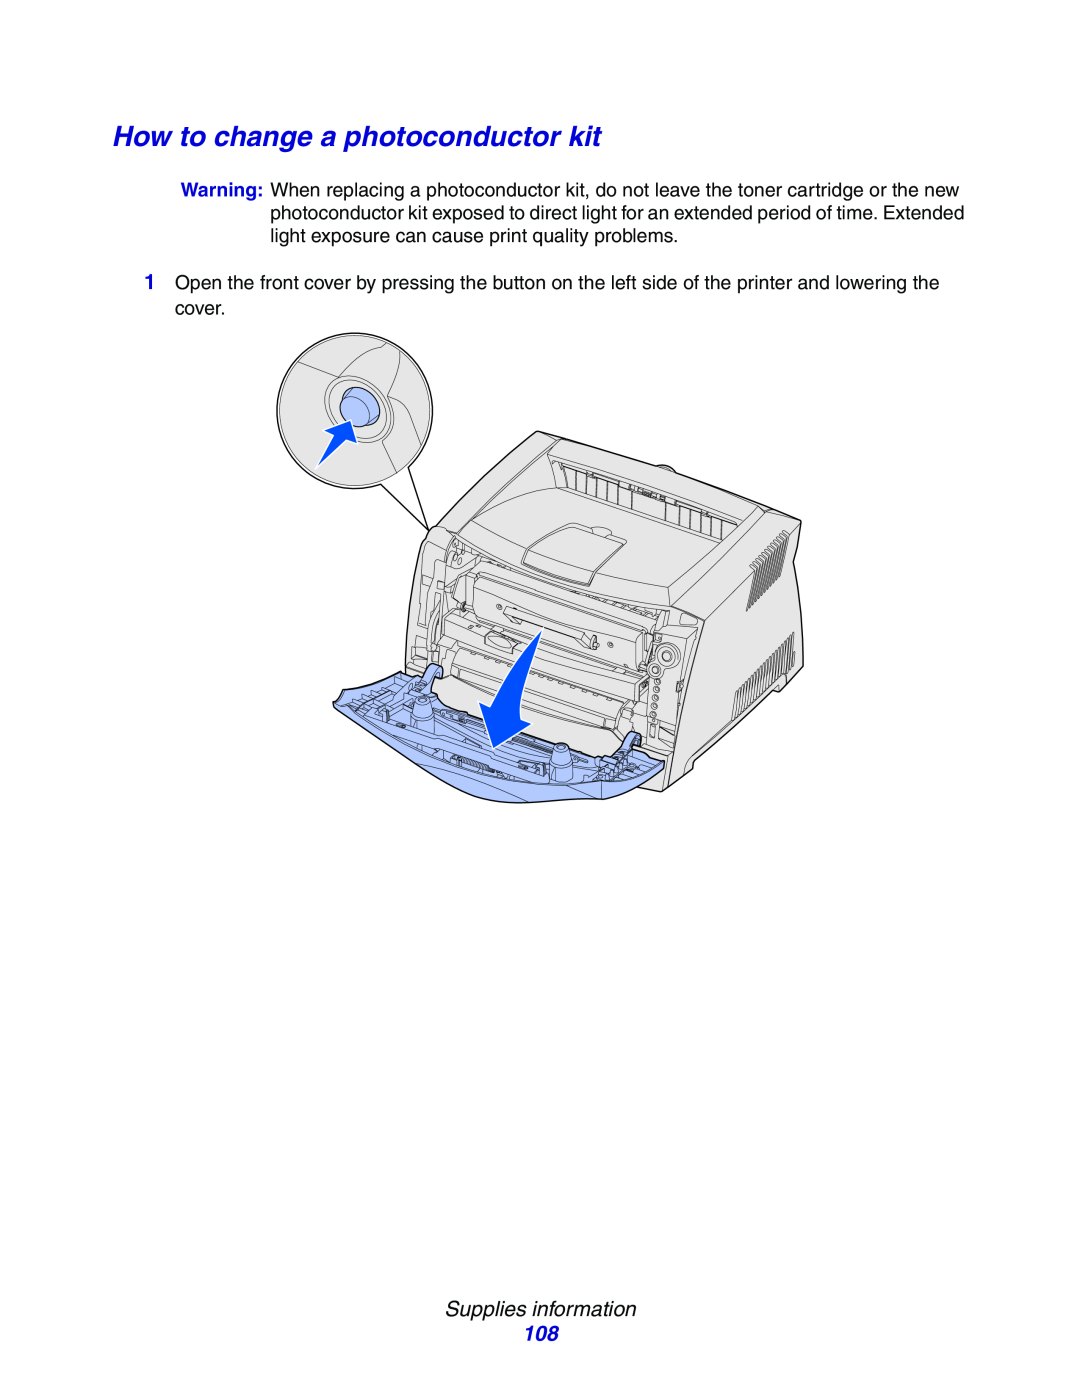 Lexmark E234N manual How to change a photoconductor kit, Supplies information 